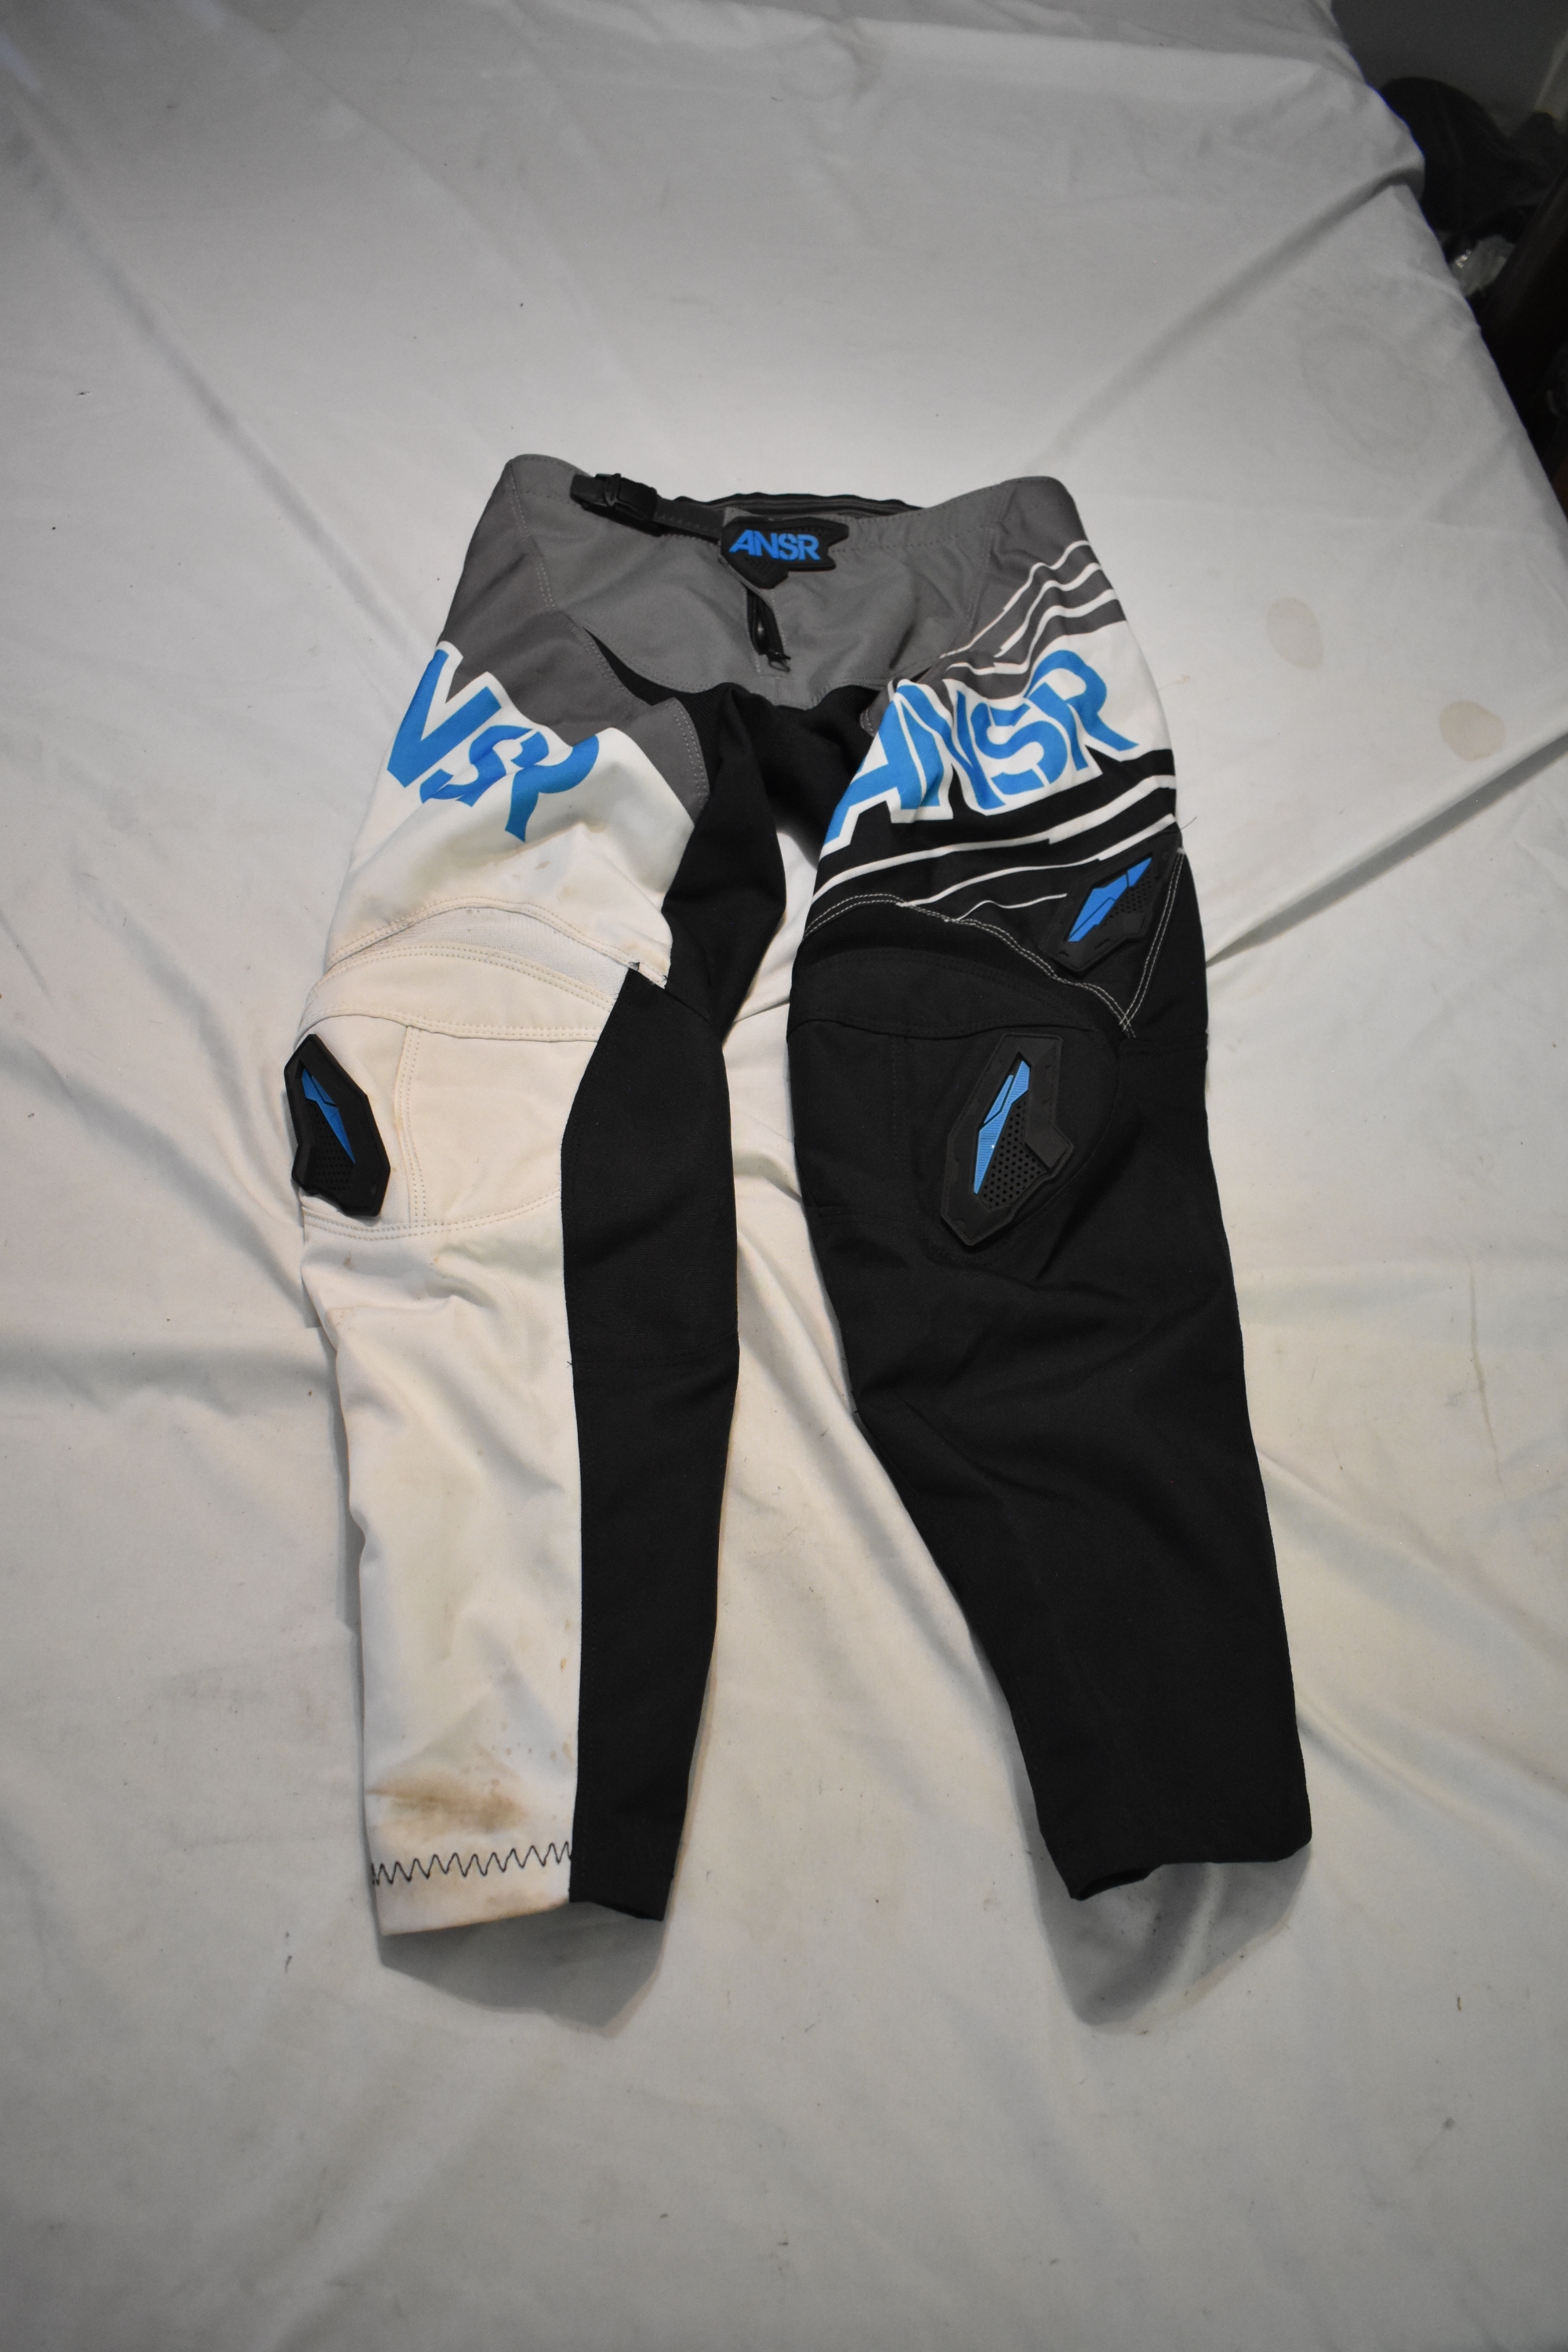 ANSWER Youth Synchron Series Motocross Pants, Size 28 - Great Condition!